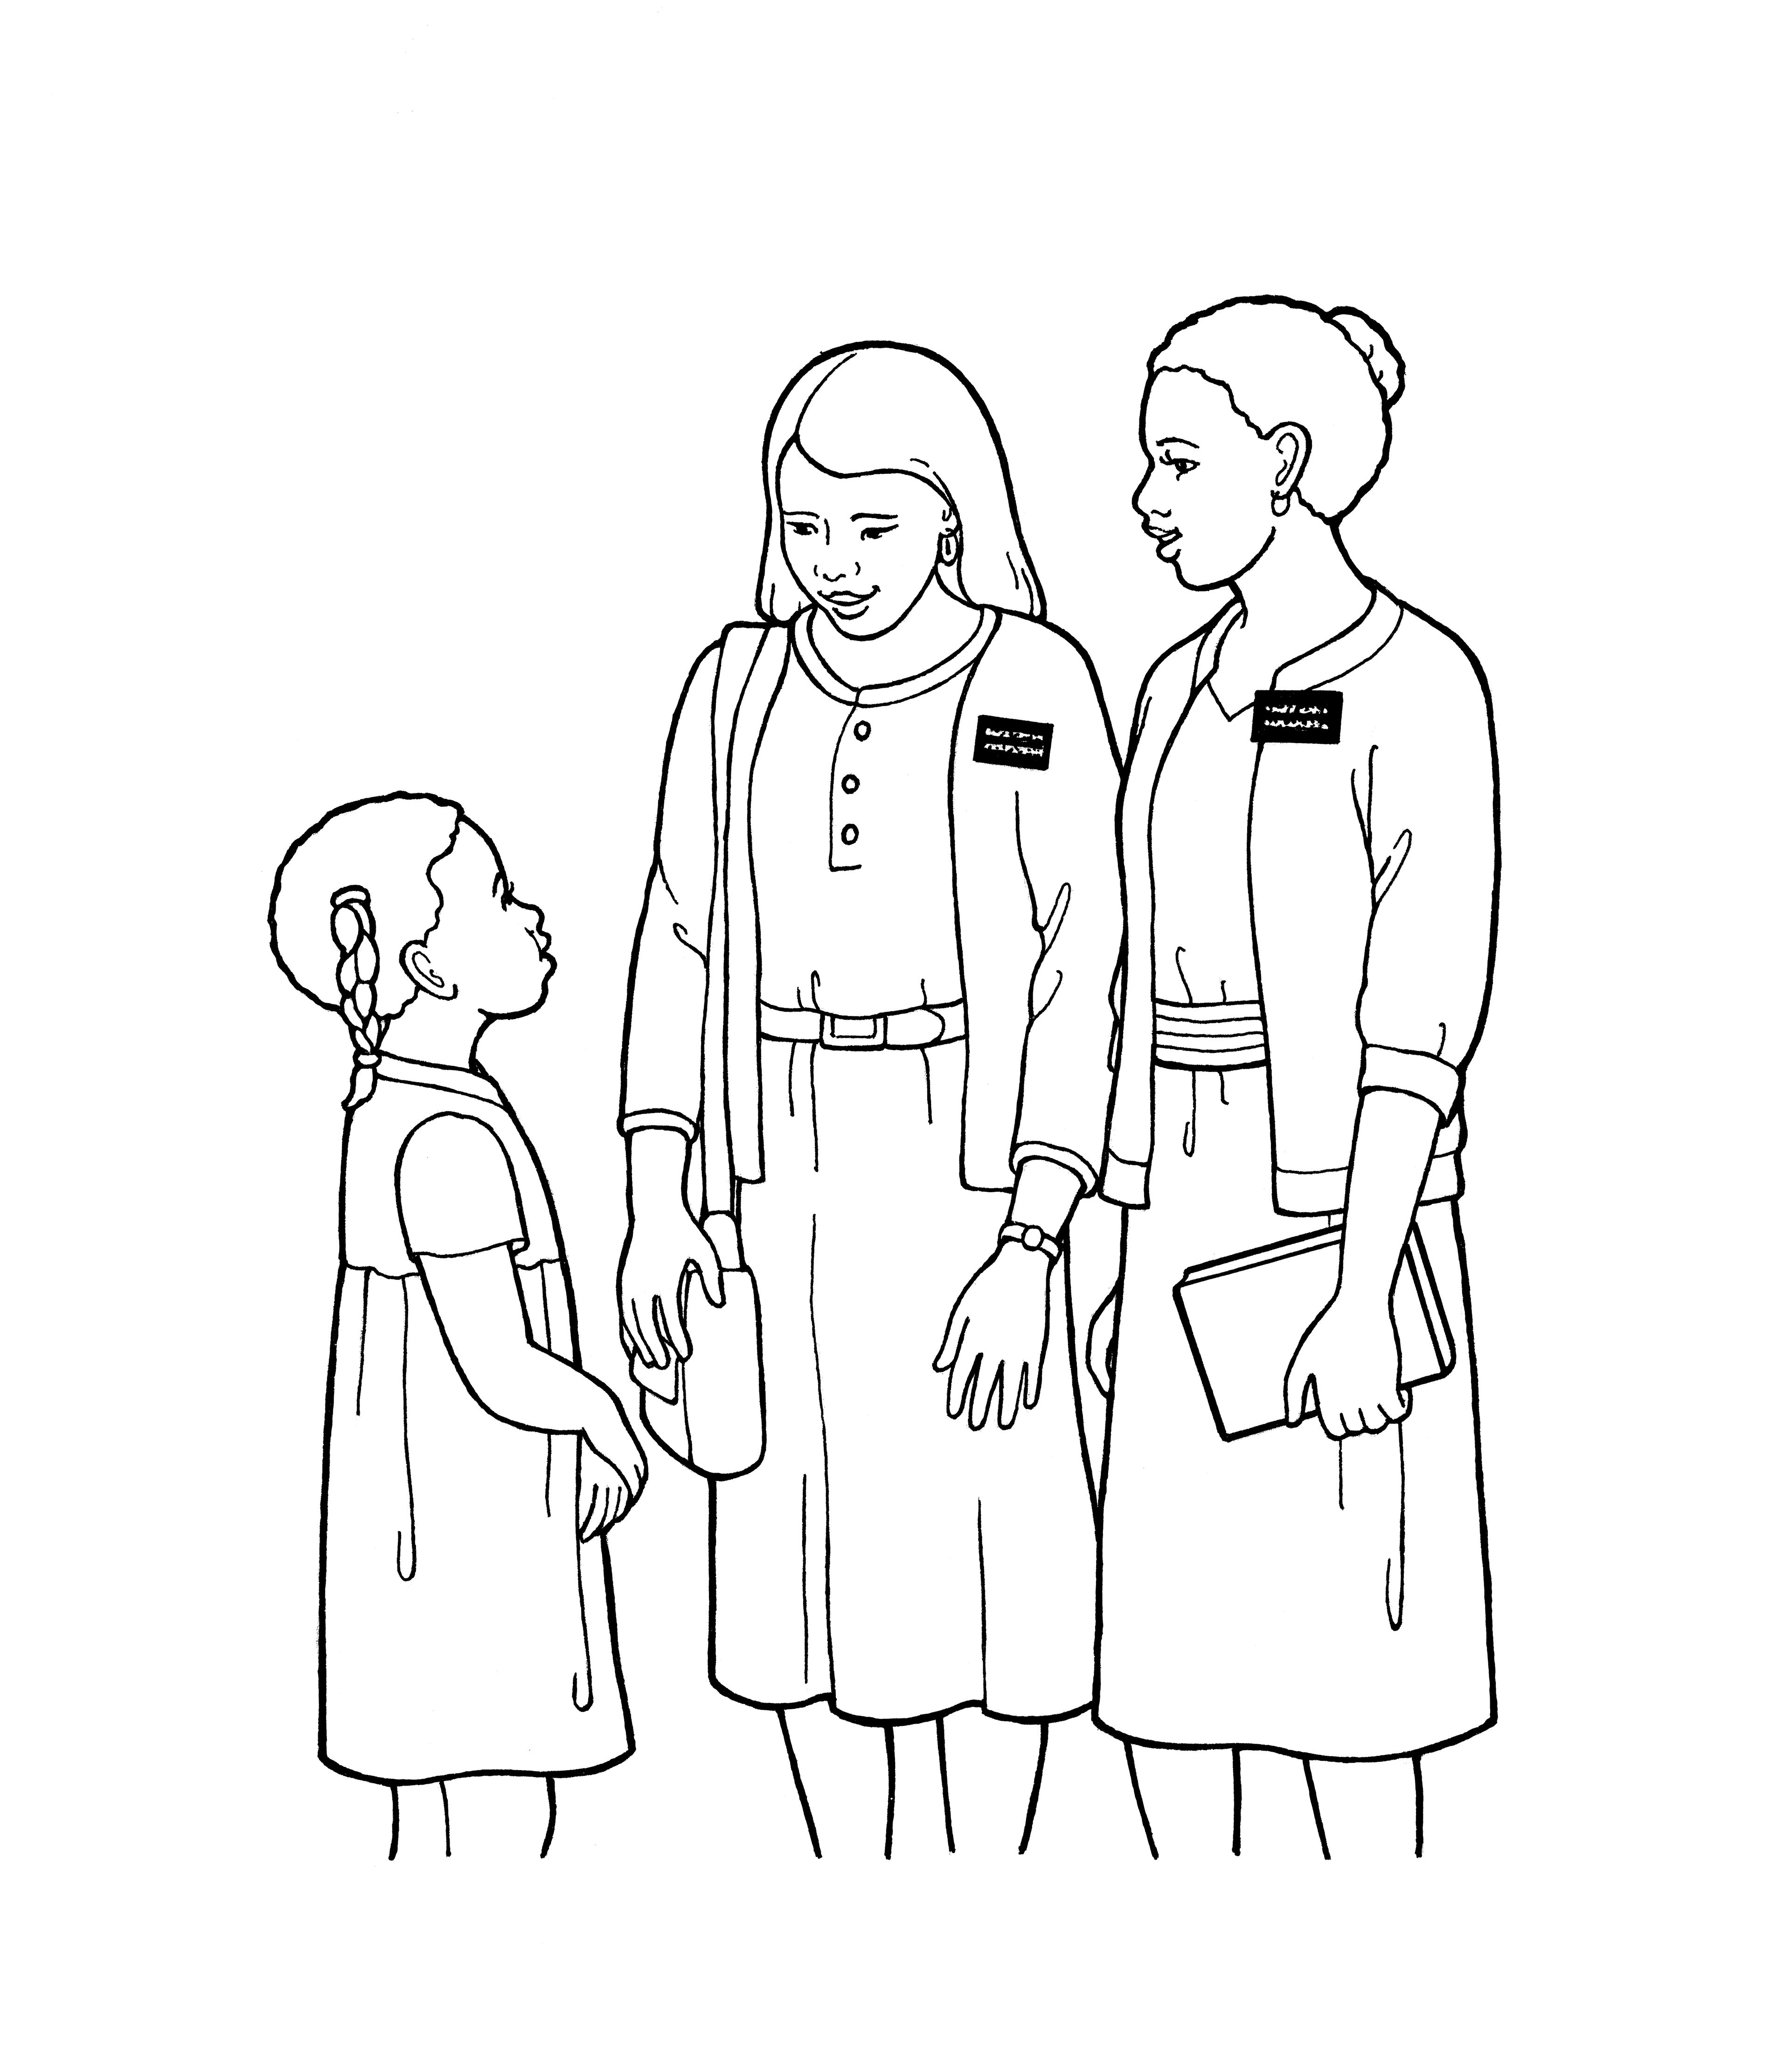 An illustration of two sister missionaries talking to a young girl.